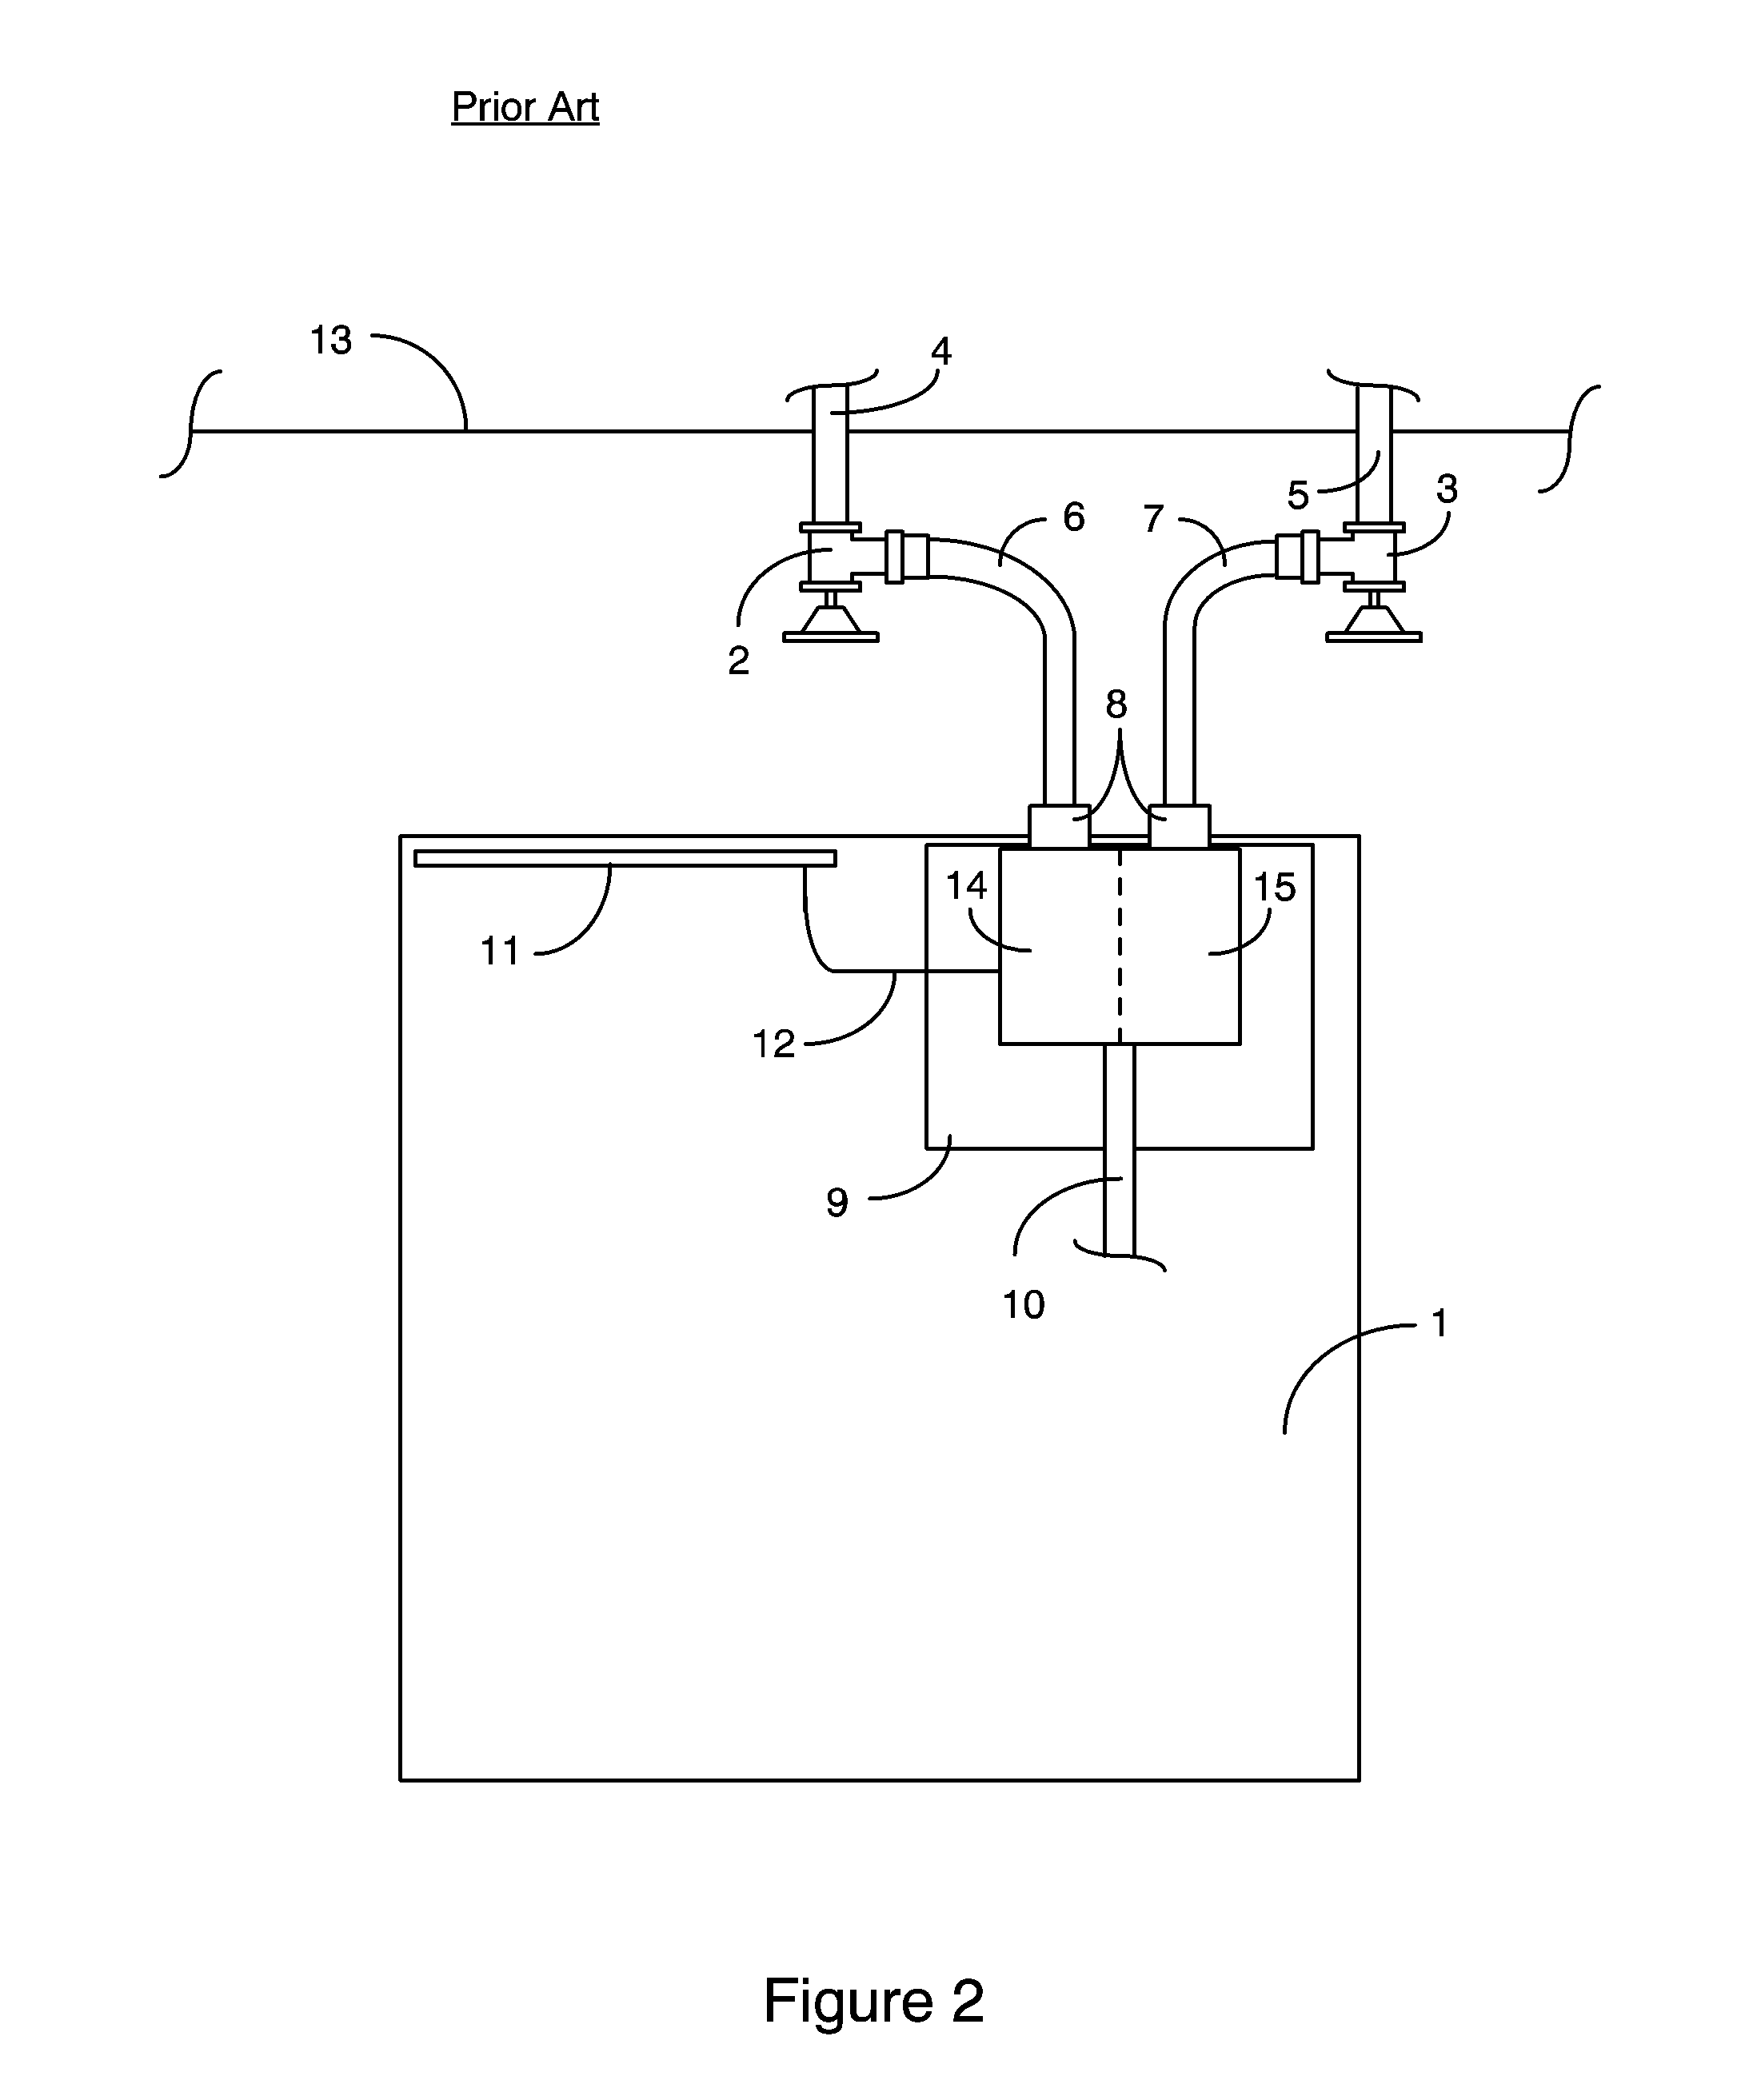 Apparatus And Method For Supplying Hot, Cold Or Mixed Water To A Washing Machine Using A Single Water Supply Hose